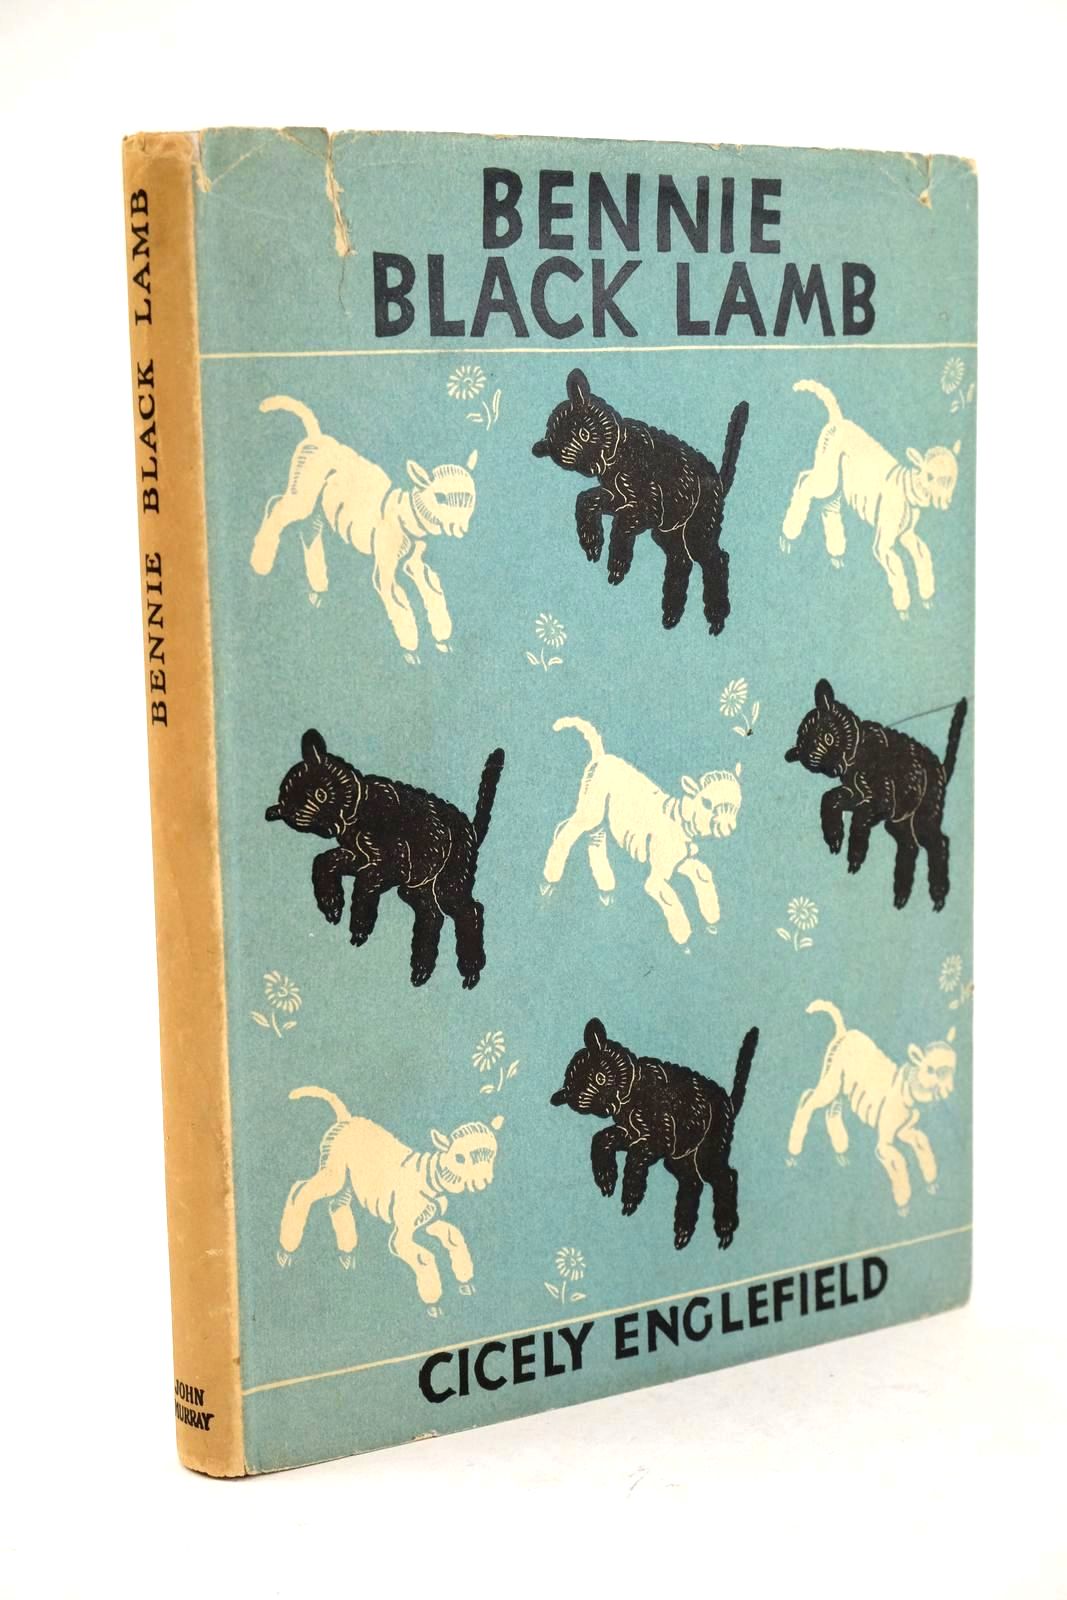 Photo of BENNIE BLACK LAMB written by Englefield, Cicely illustrated by Englefield, Cicely published by John Murray (STOCK CODE: 1324239)  for sale by Stella & Rose's Books